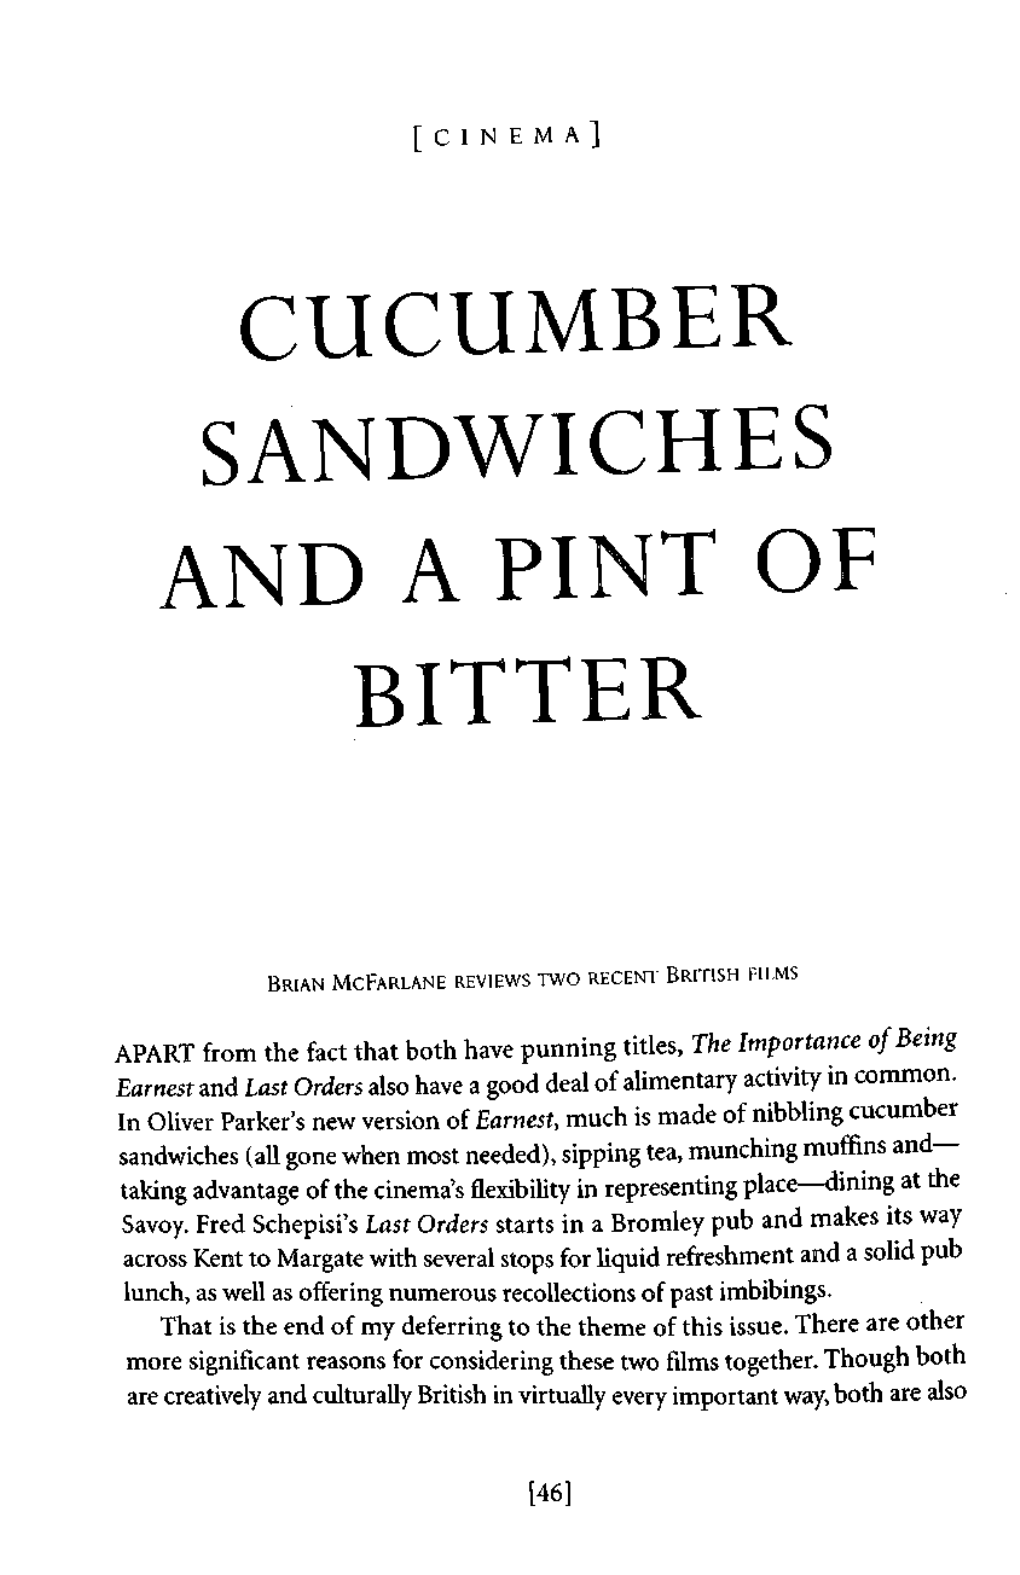 Cucumber Sandwiches and a Pint of Bitter